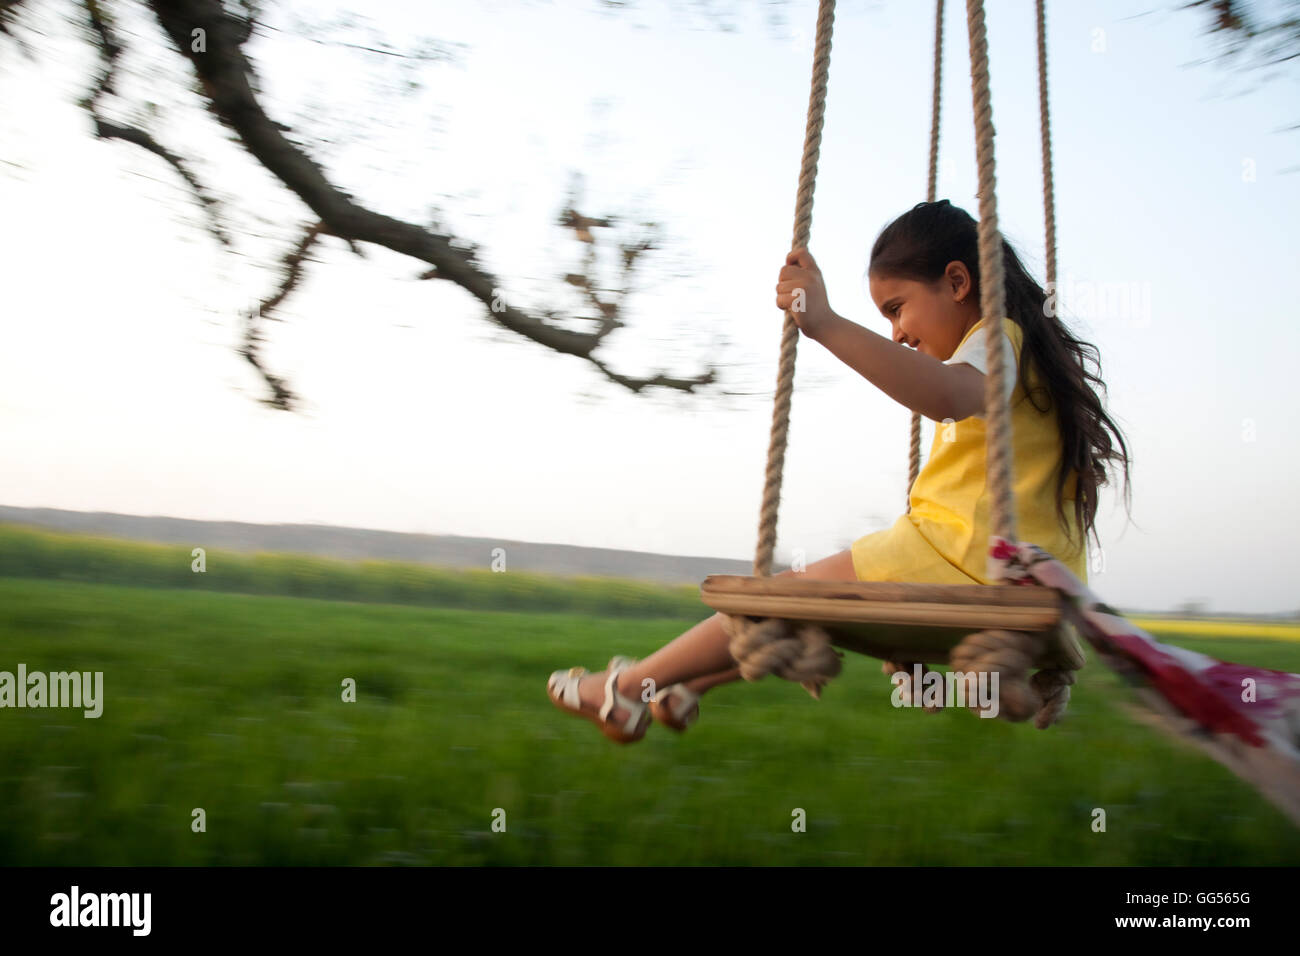 Young girl on a swing Stock Photo